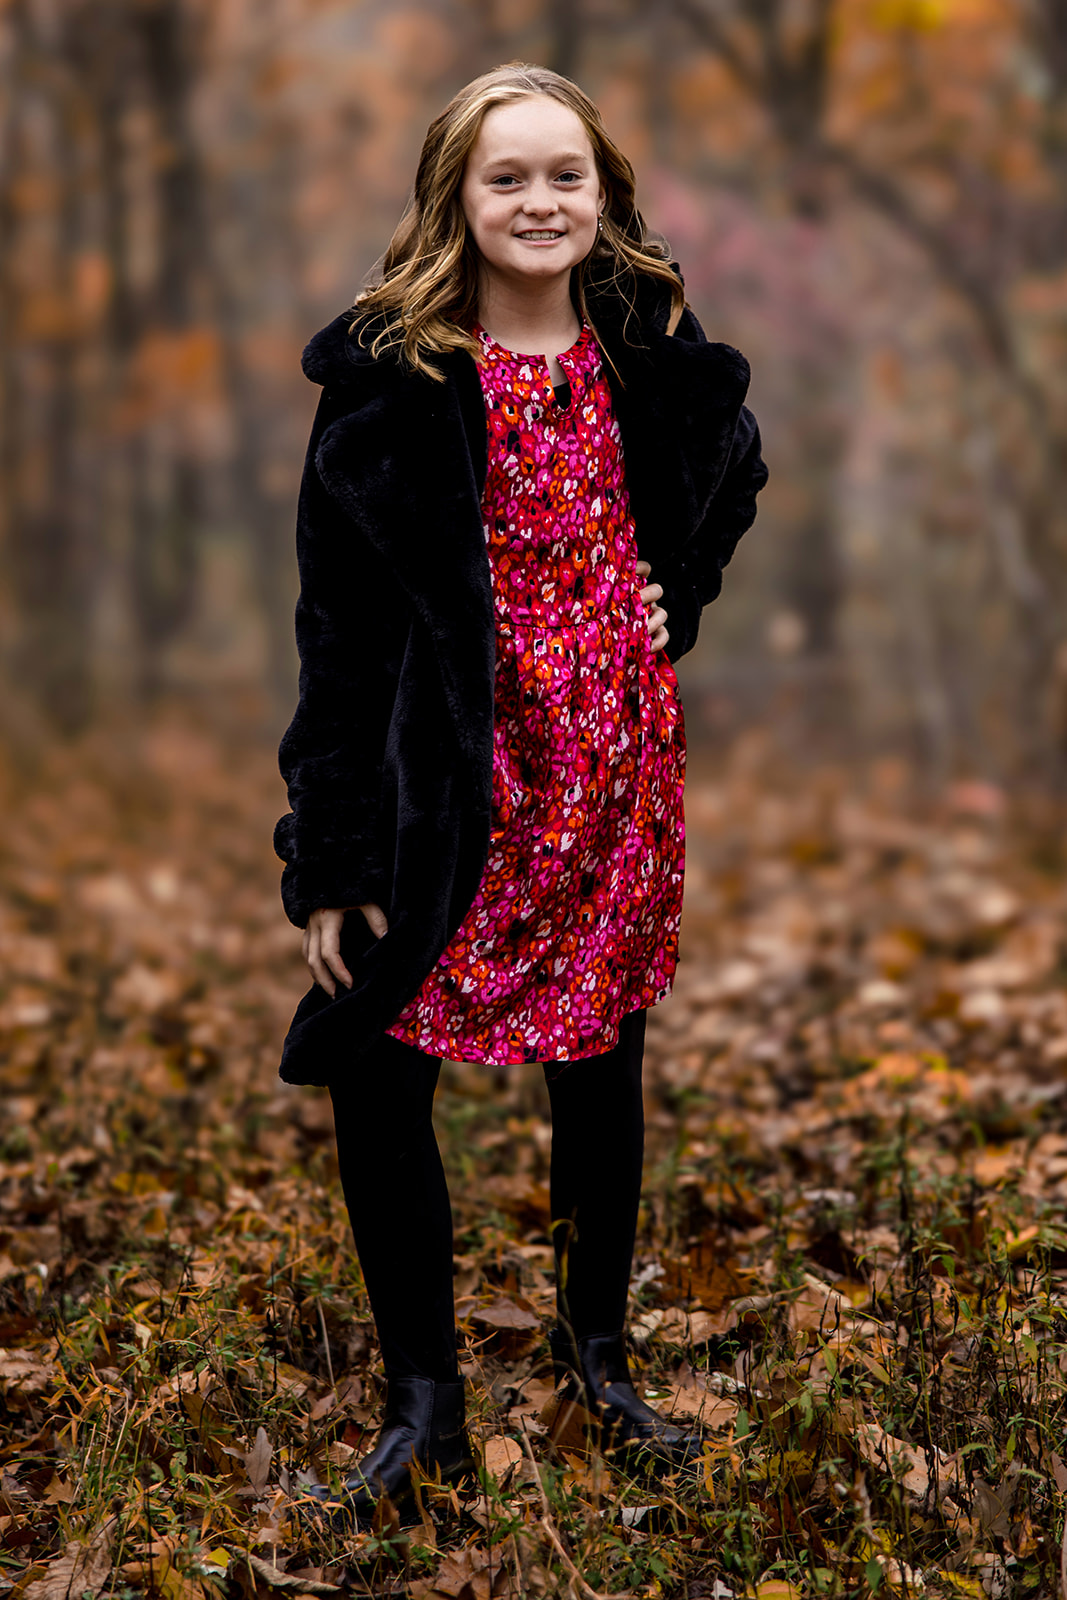 Golden Hour Gathering: West Salem's Autumn Family Portrait Session by Jeff Wiswell of J.L. Wiswell Photography of Onalas